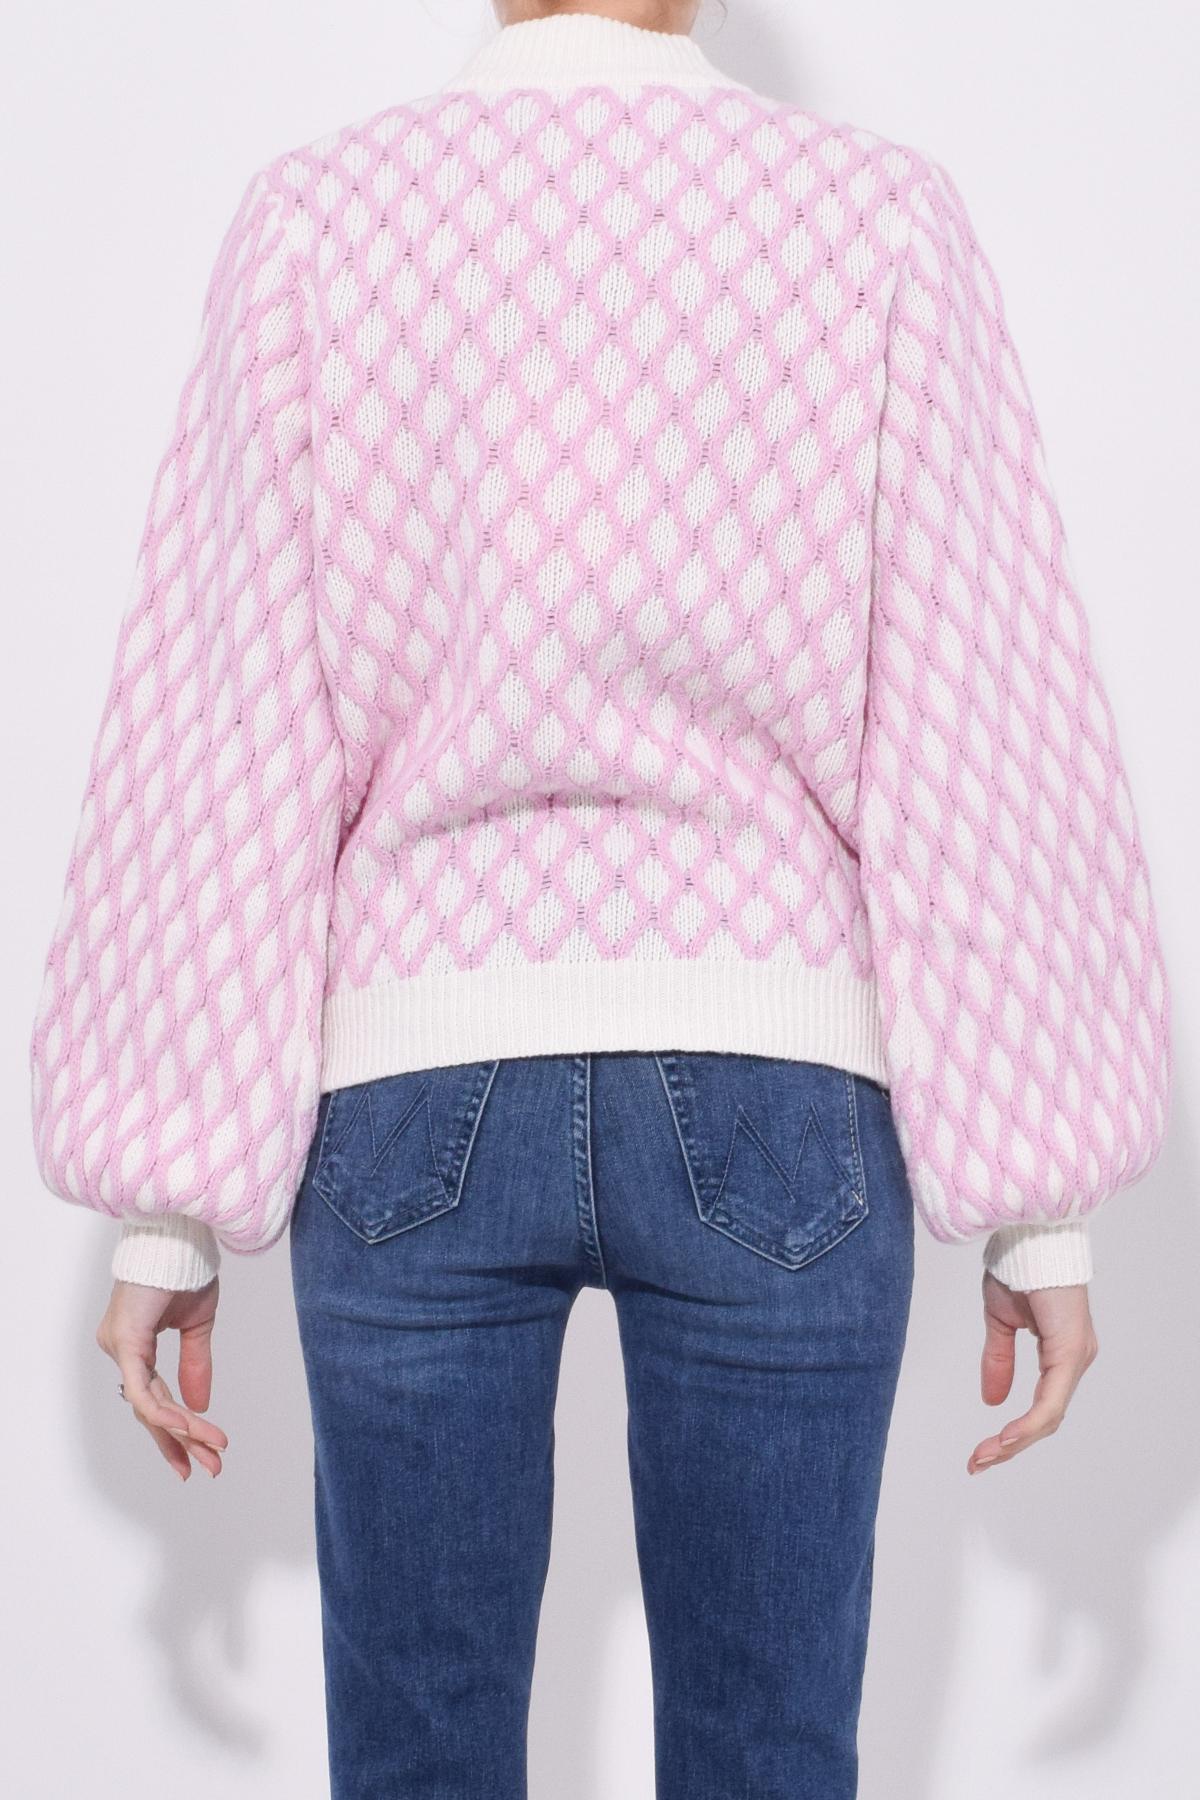 forord Nathaniel Ward Ideel Stine Goya Carlo Cable Knit Wool-blend Sweater in Pink - Lyst